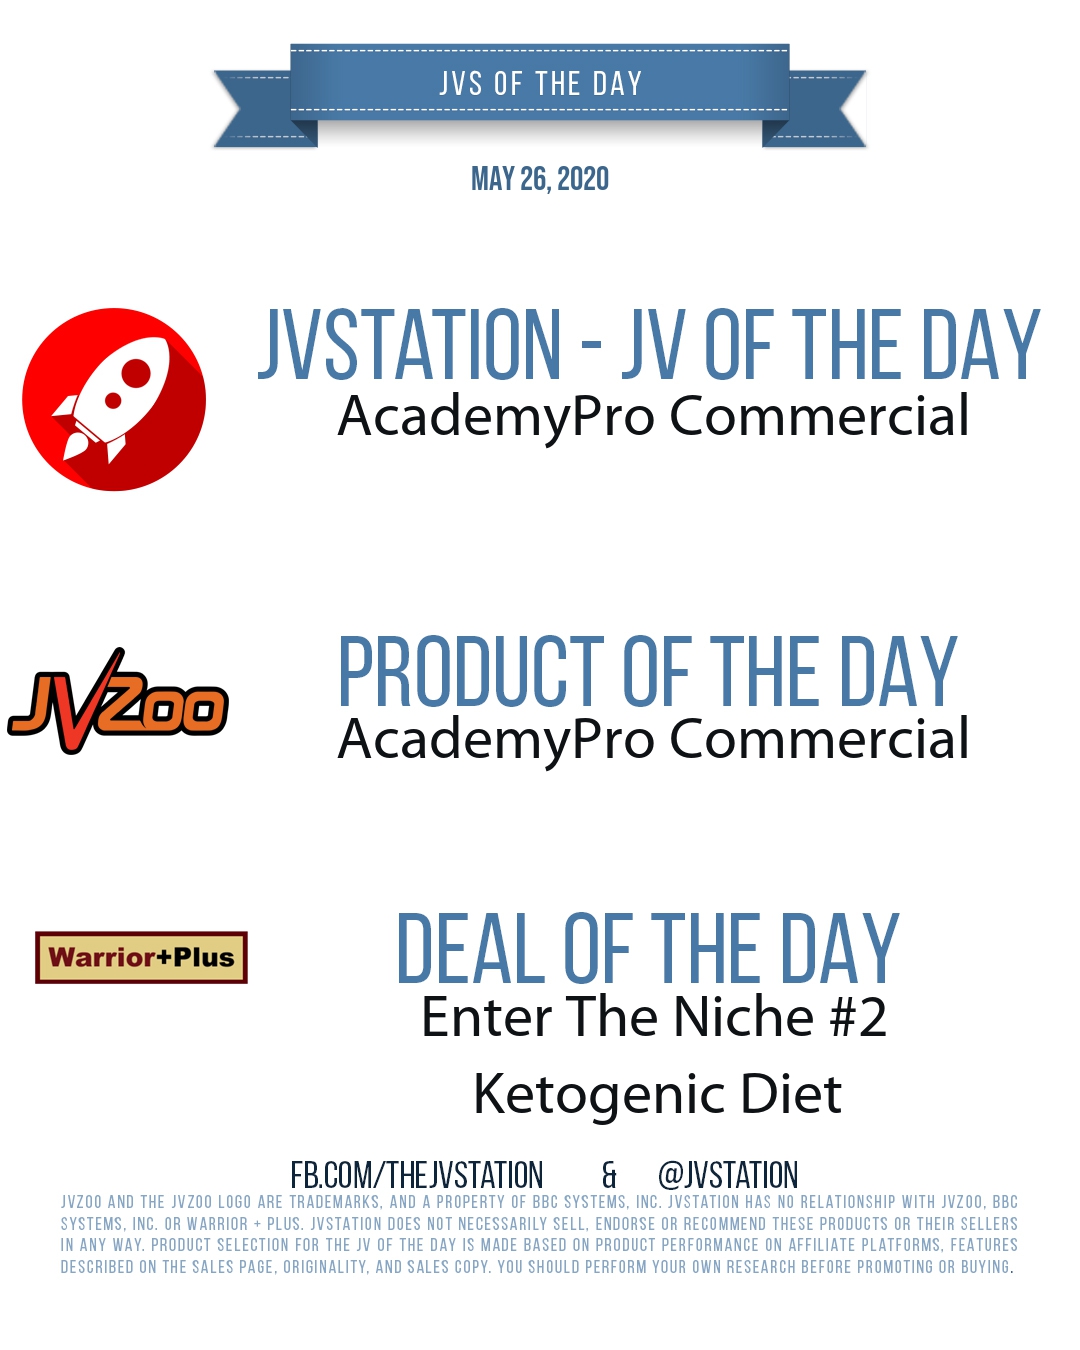 JVs of the day - May 26, 2020